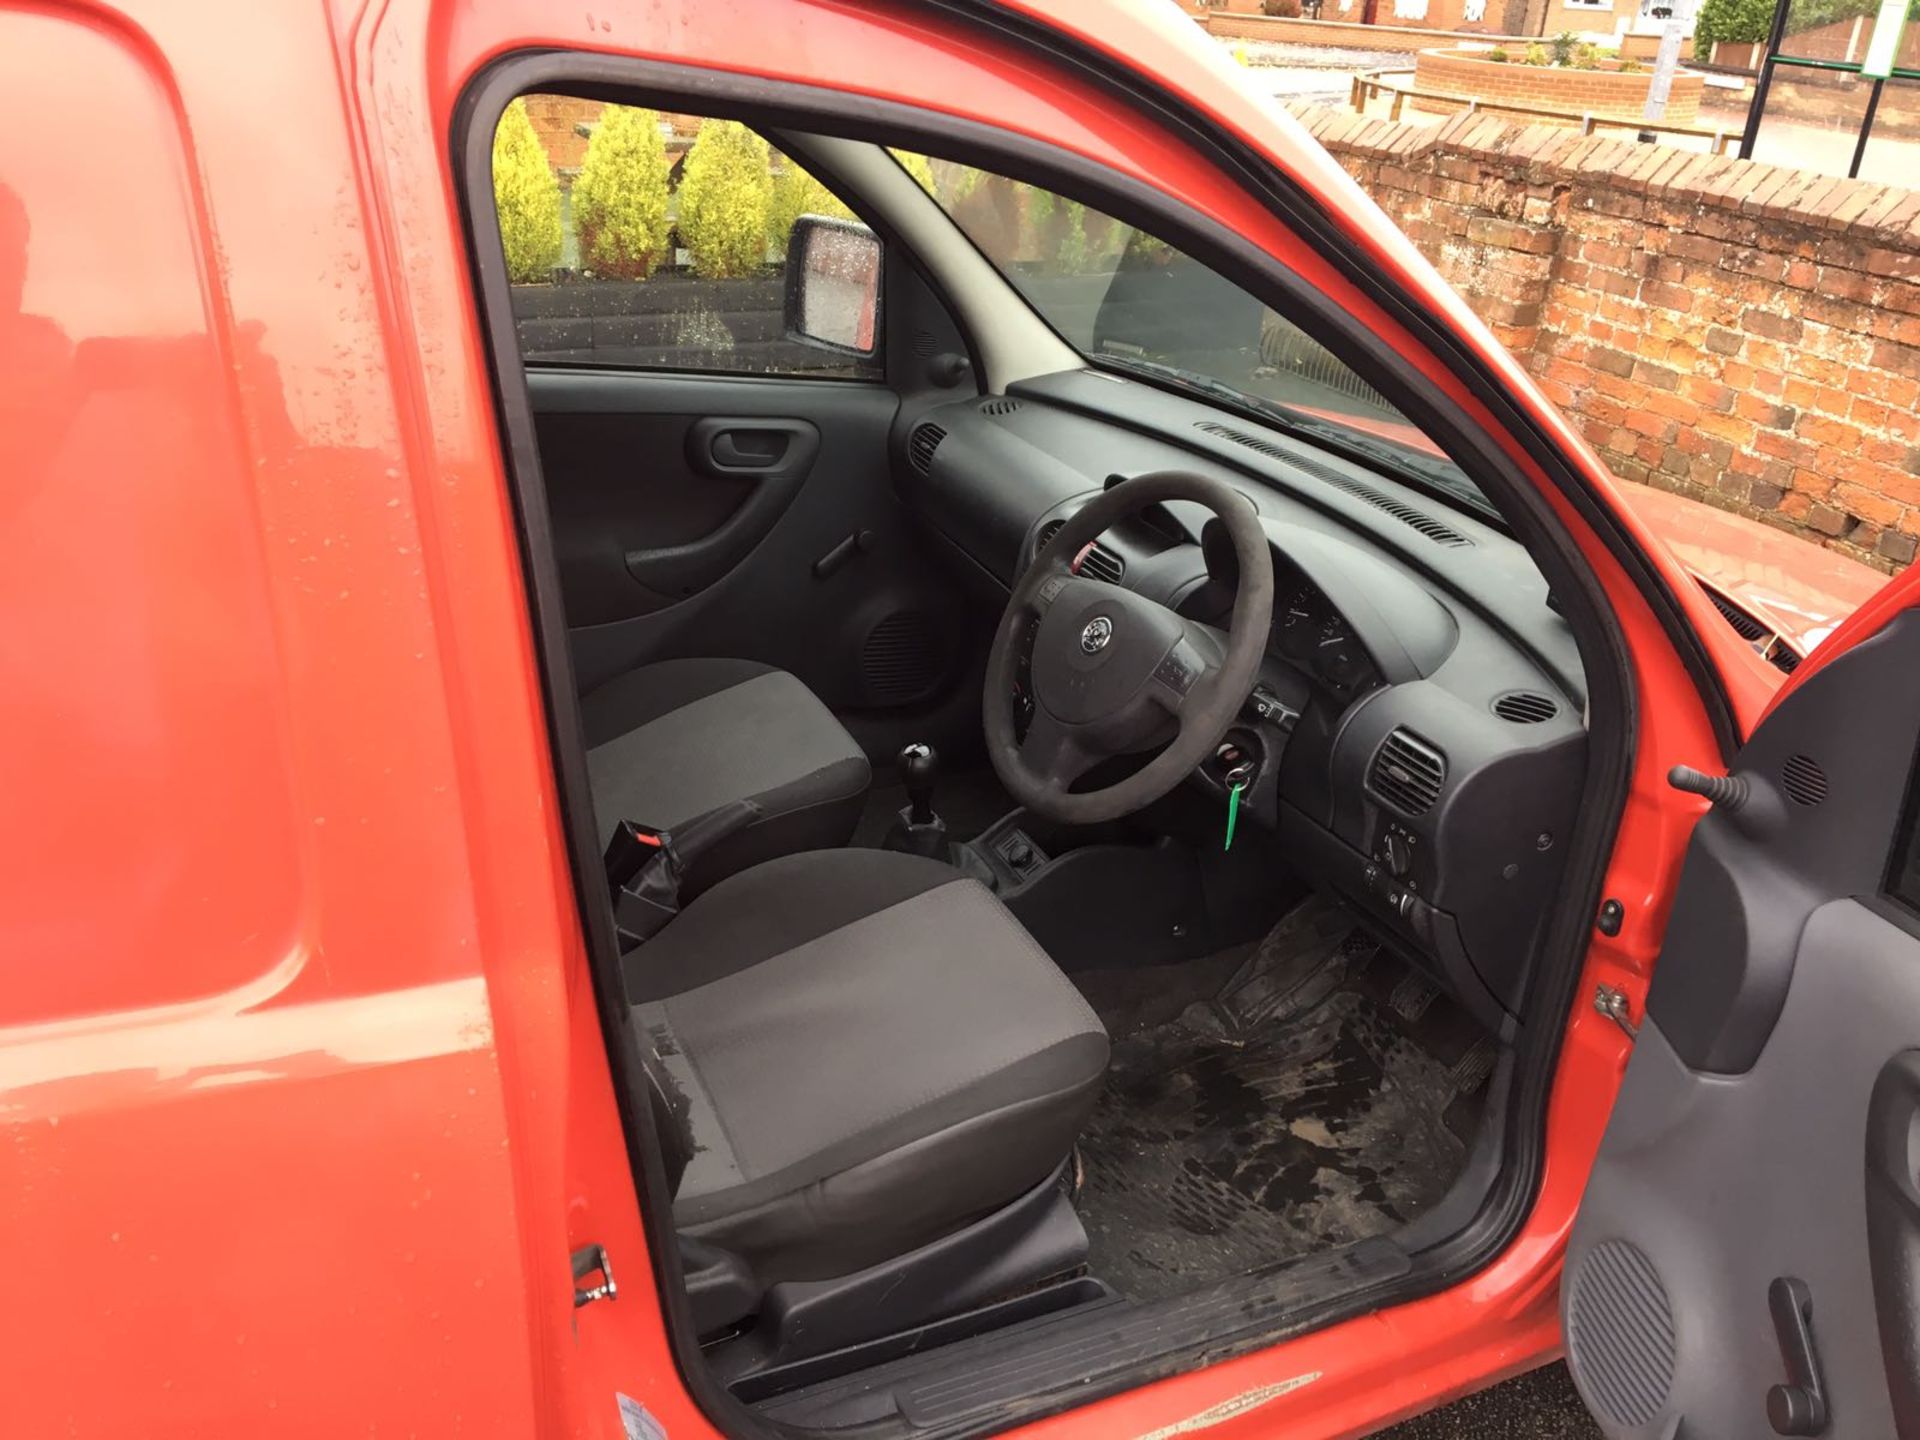 2008/58 REG VAUXHALL COMBO 1700 CDTI, 1 OWNER FROM NEW *NO VAT* - Image 6 of 8